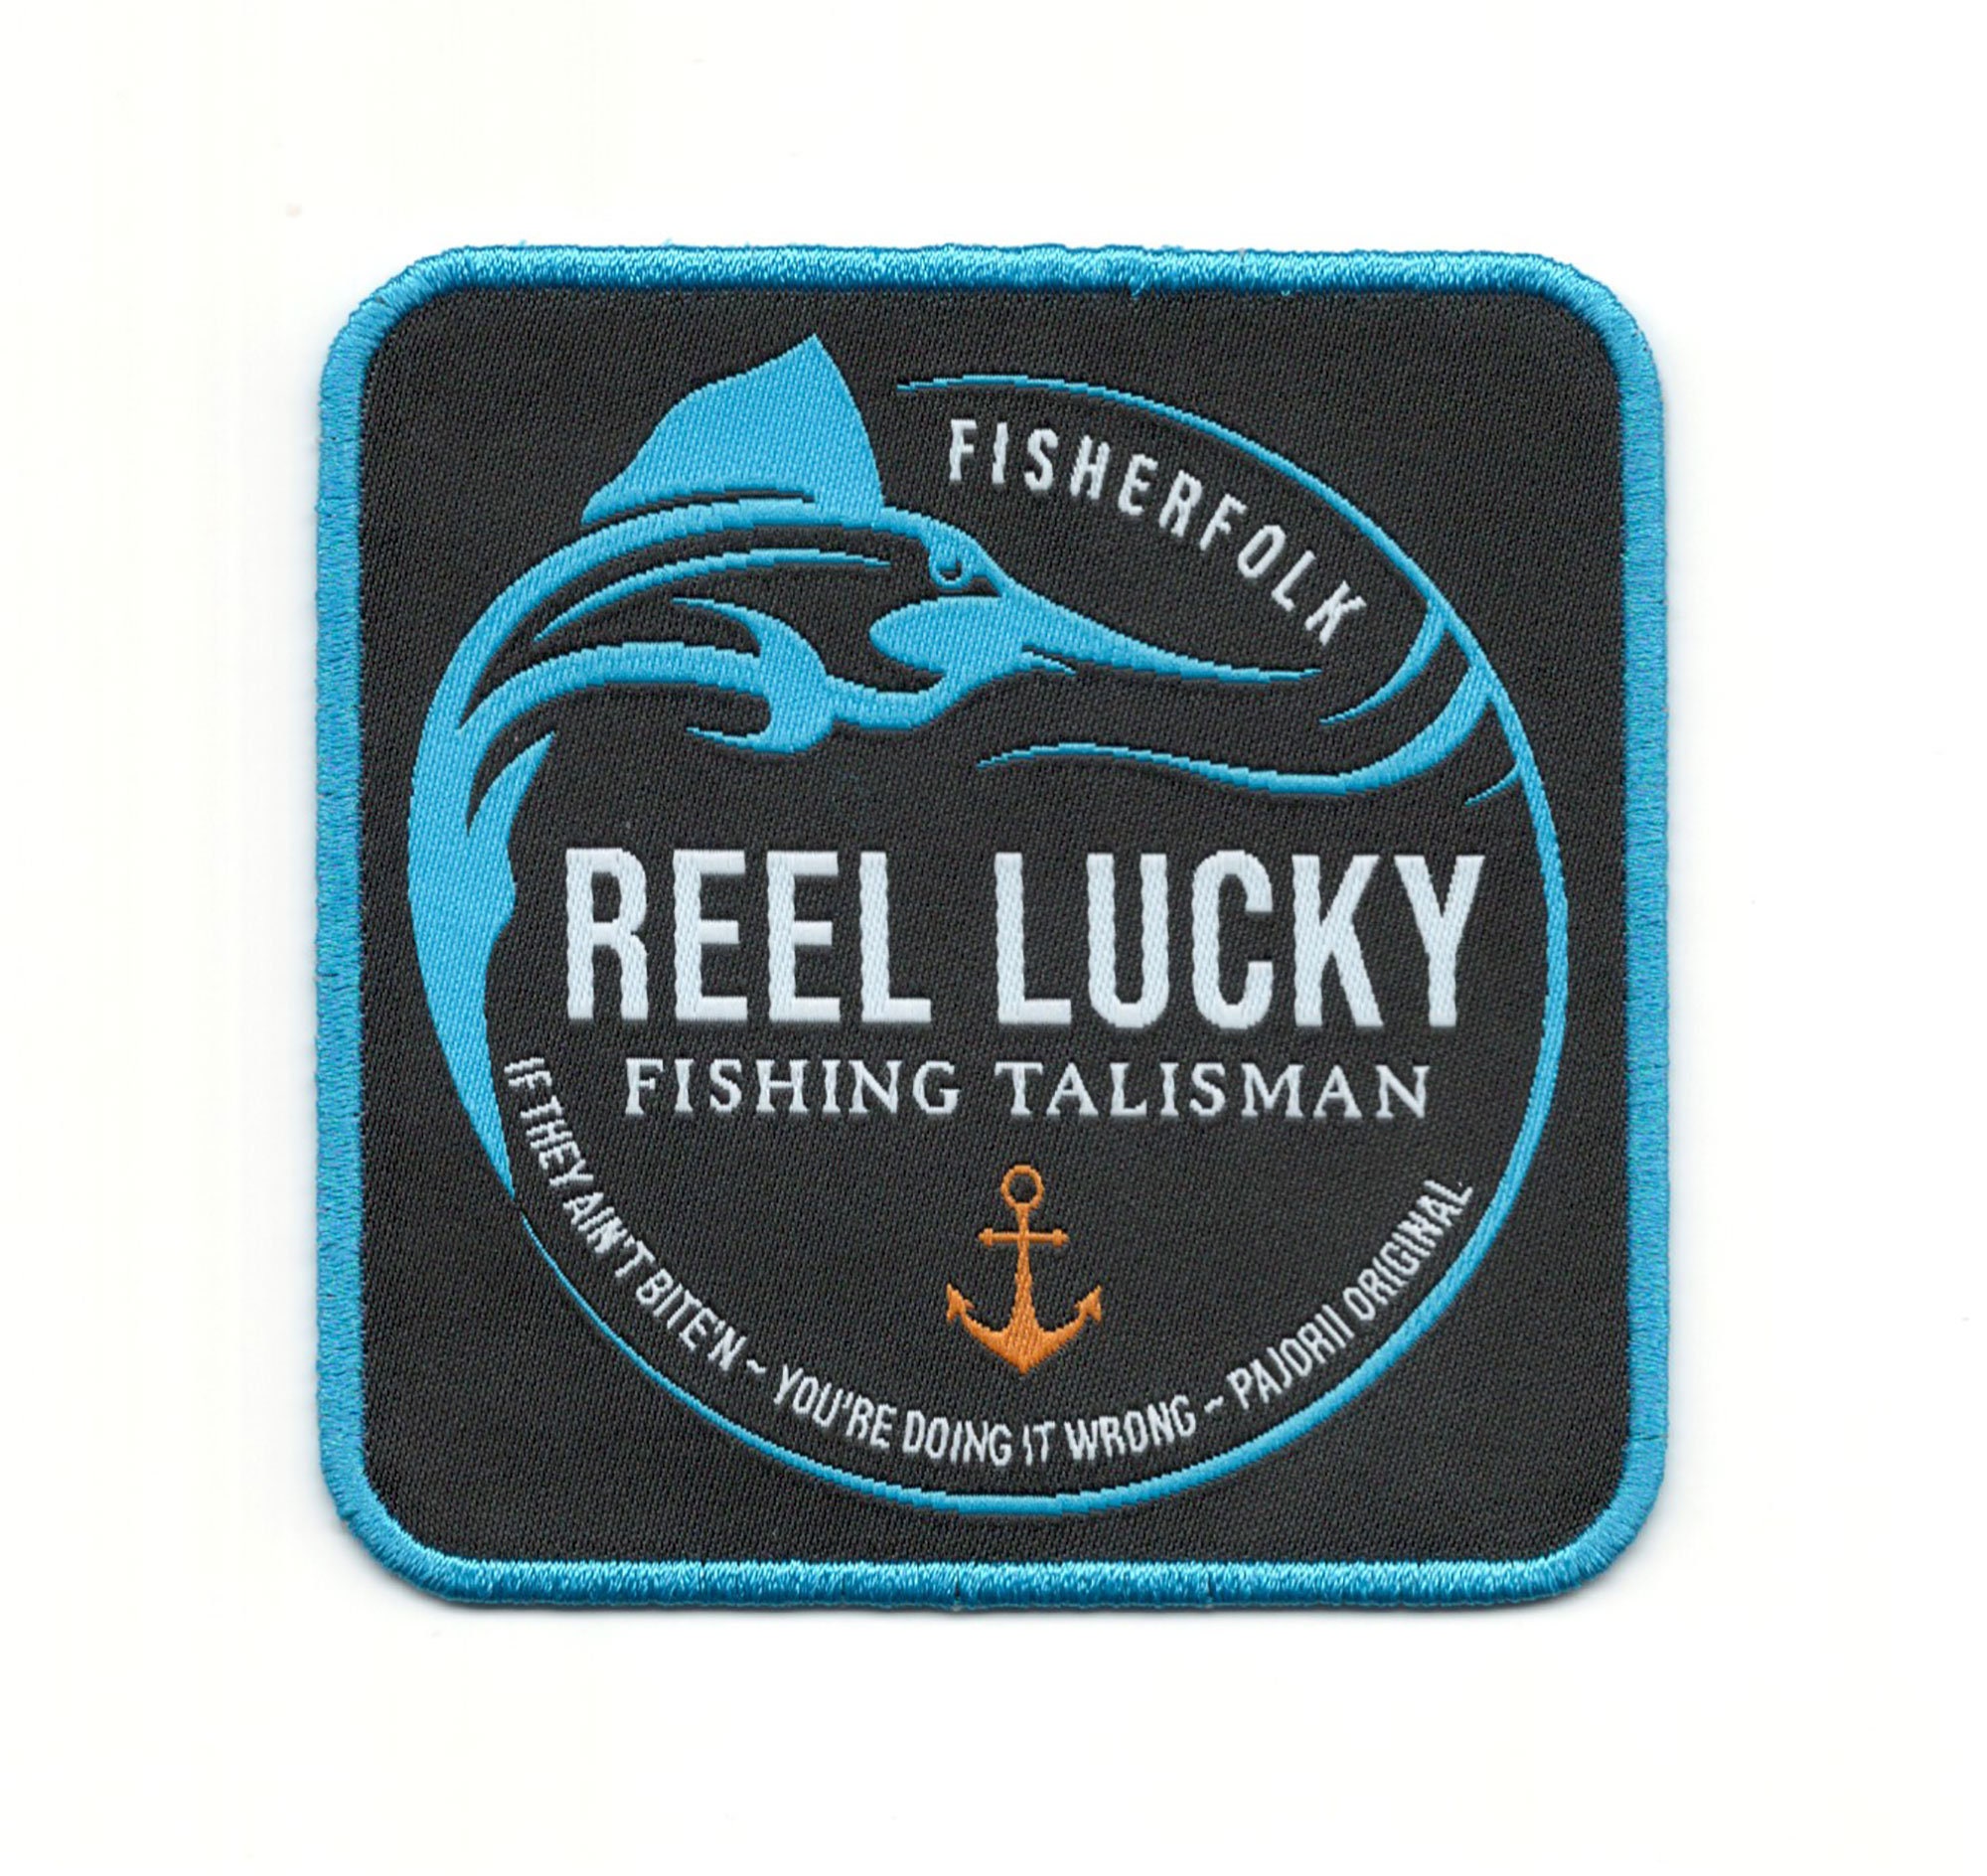 Outdoor Fishing Patch Neoprene Printed Iron on Reel Lucky Fishing  Embroidery Patch Blue on Black Fisherfolk Lucky Fishing Talisman B663 